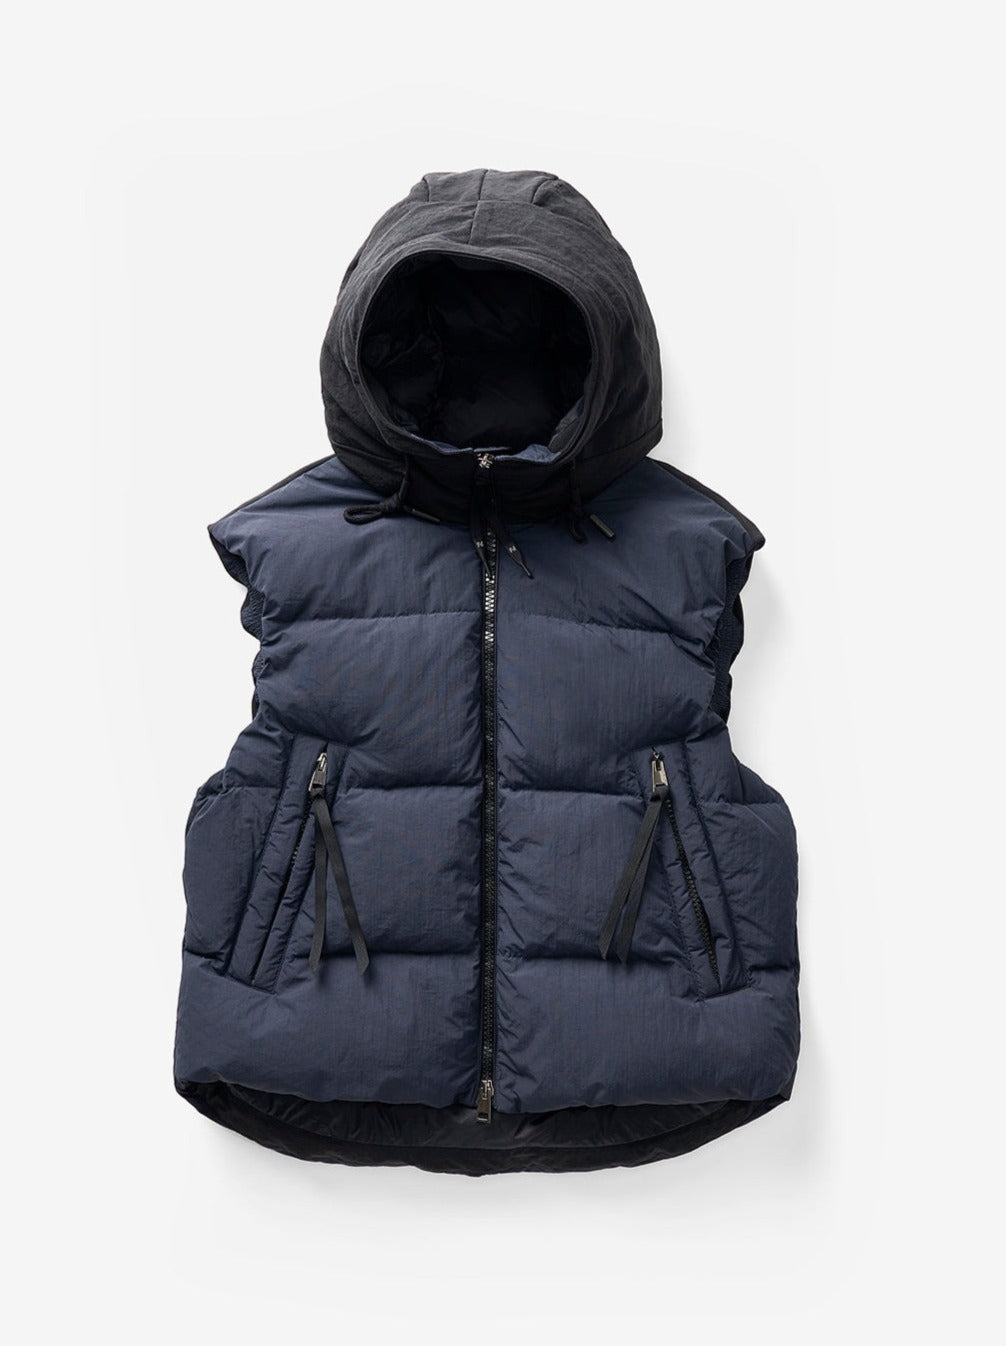 Man HOODED DOWN VEST - Navy - flat lay - front